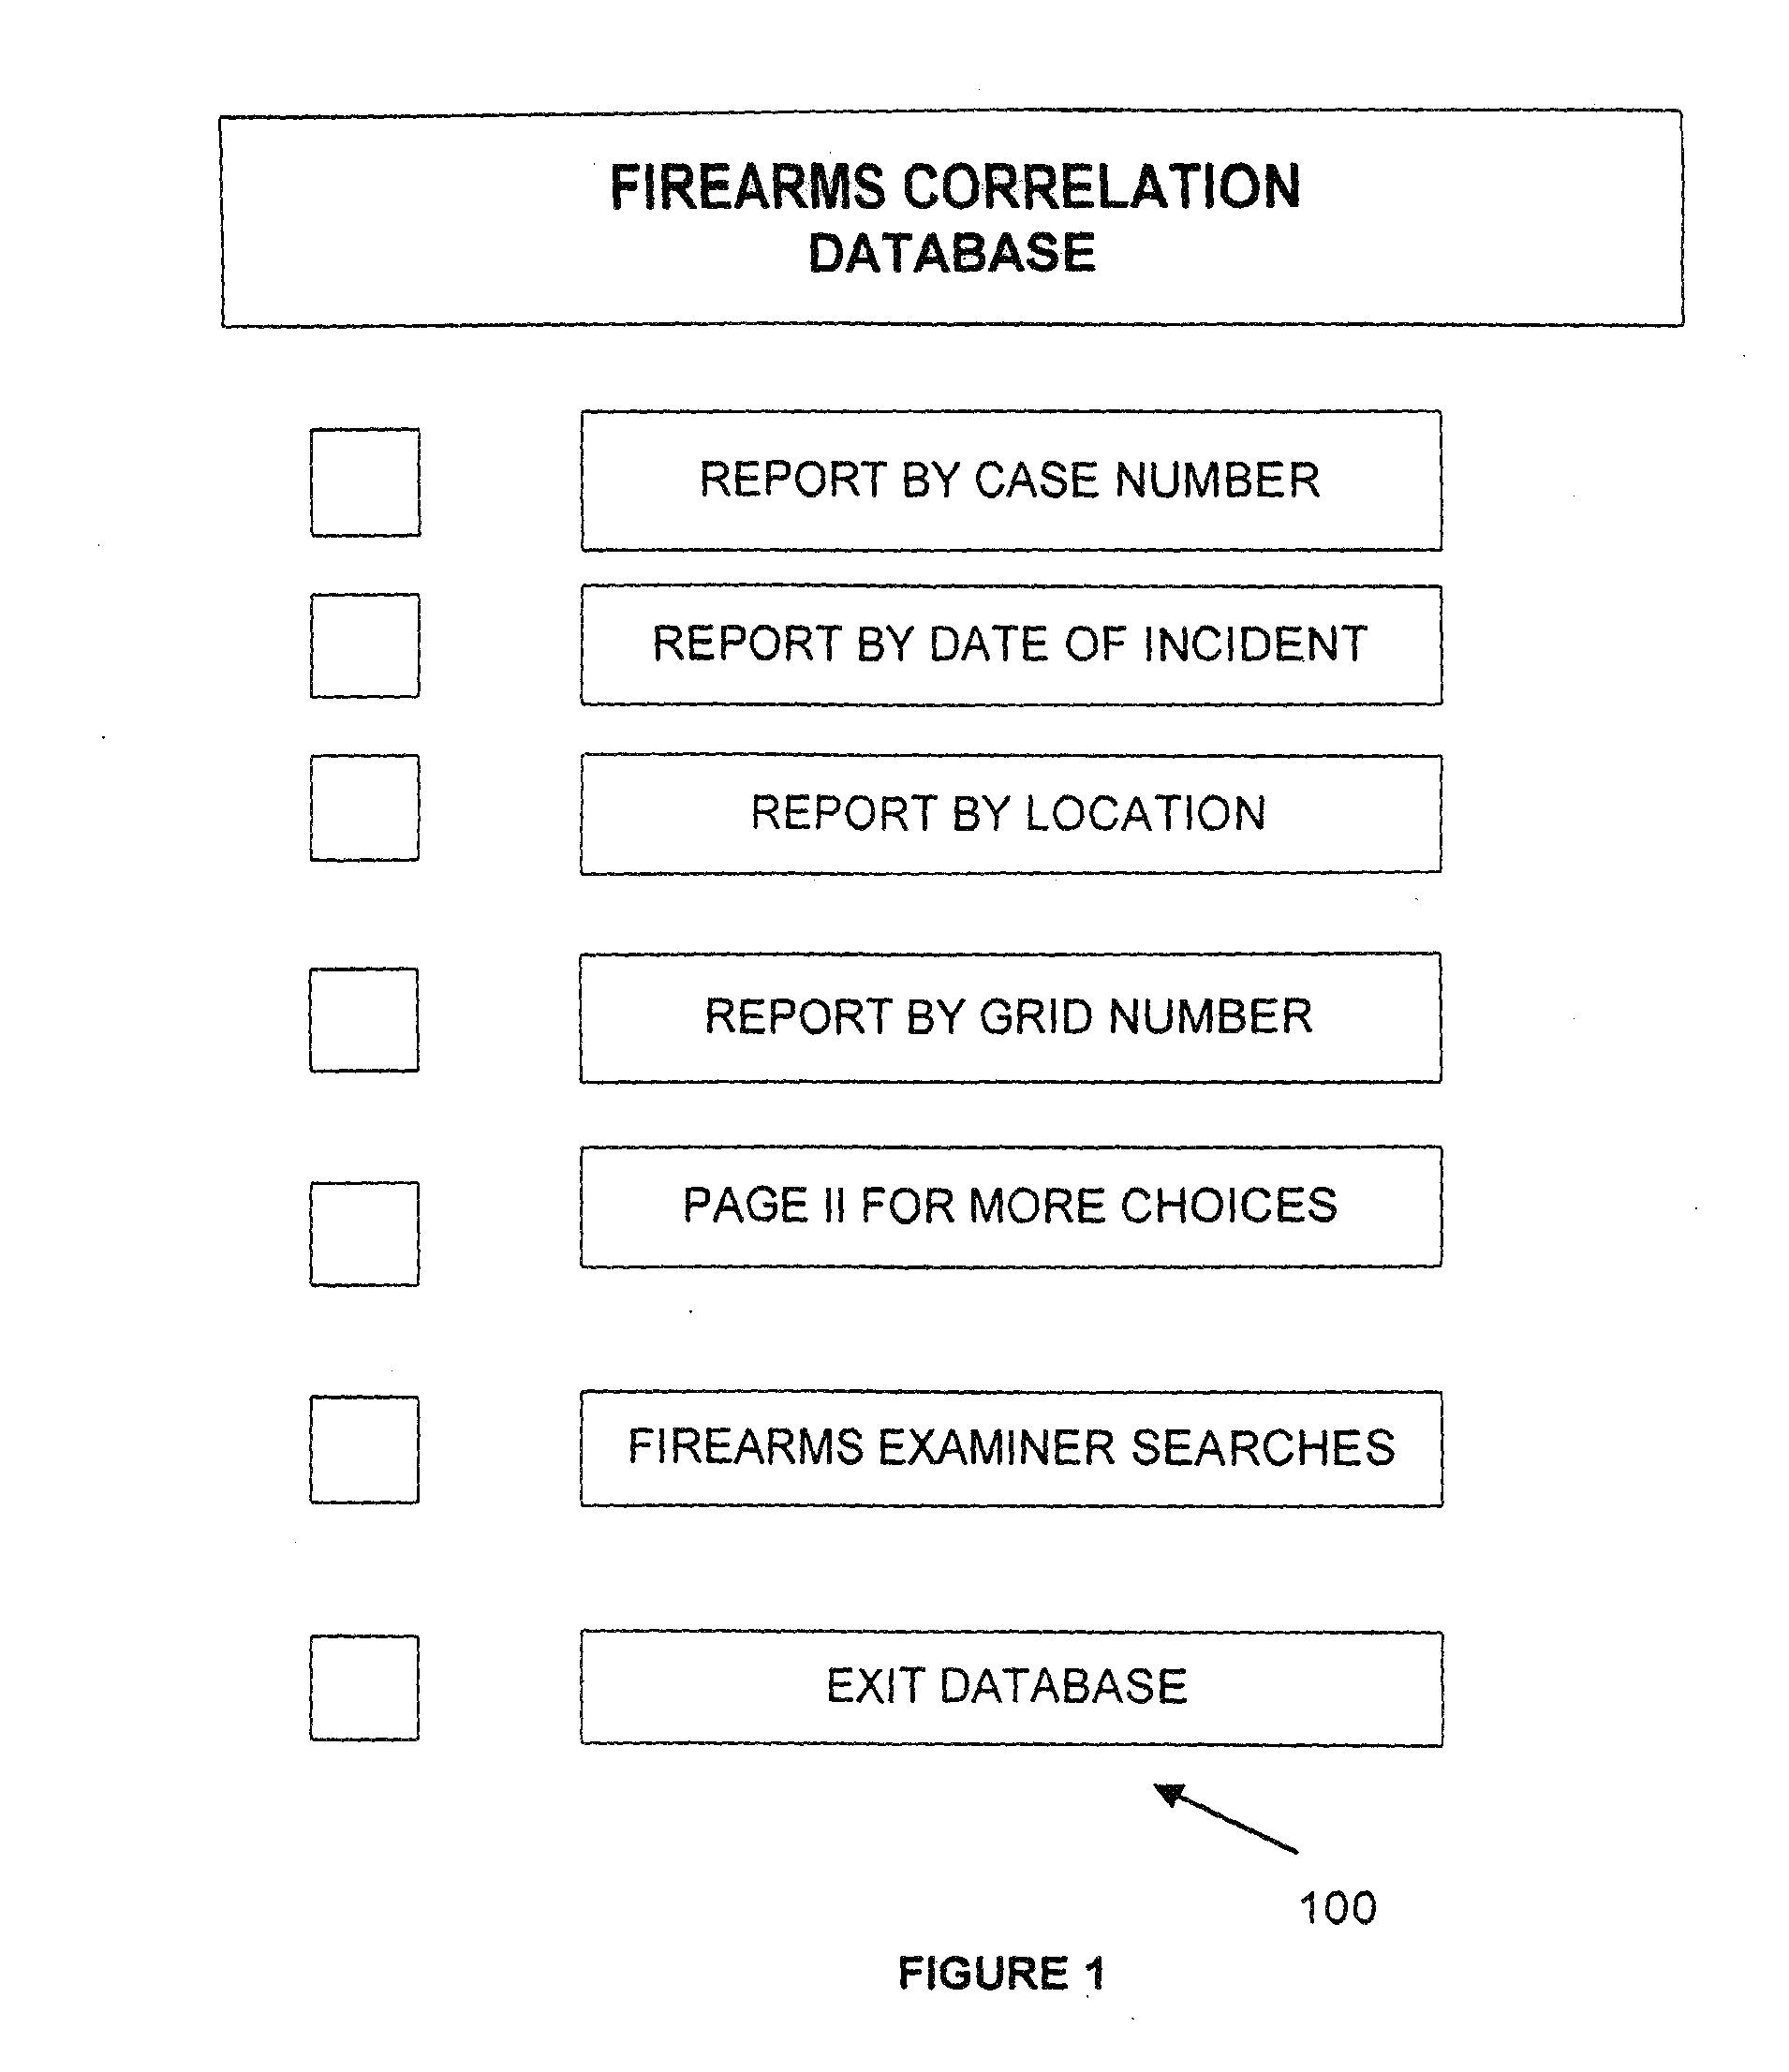 System and Methods for Linking Multiple Events Involving Firearms and Gang Related Activities